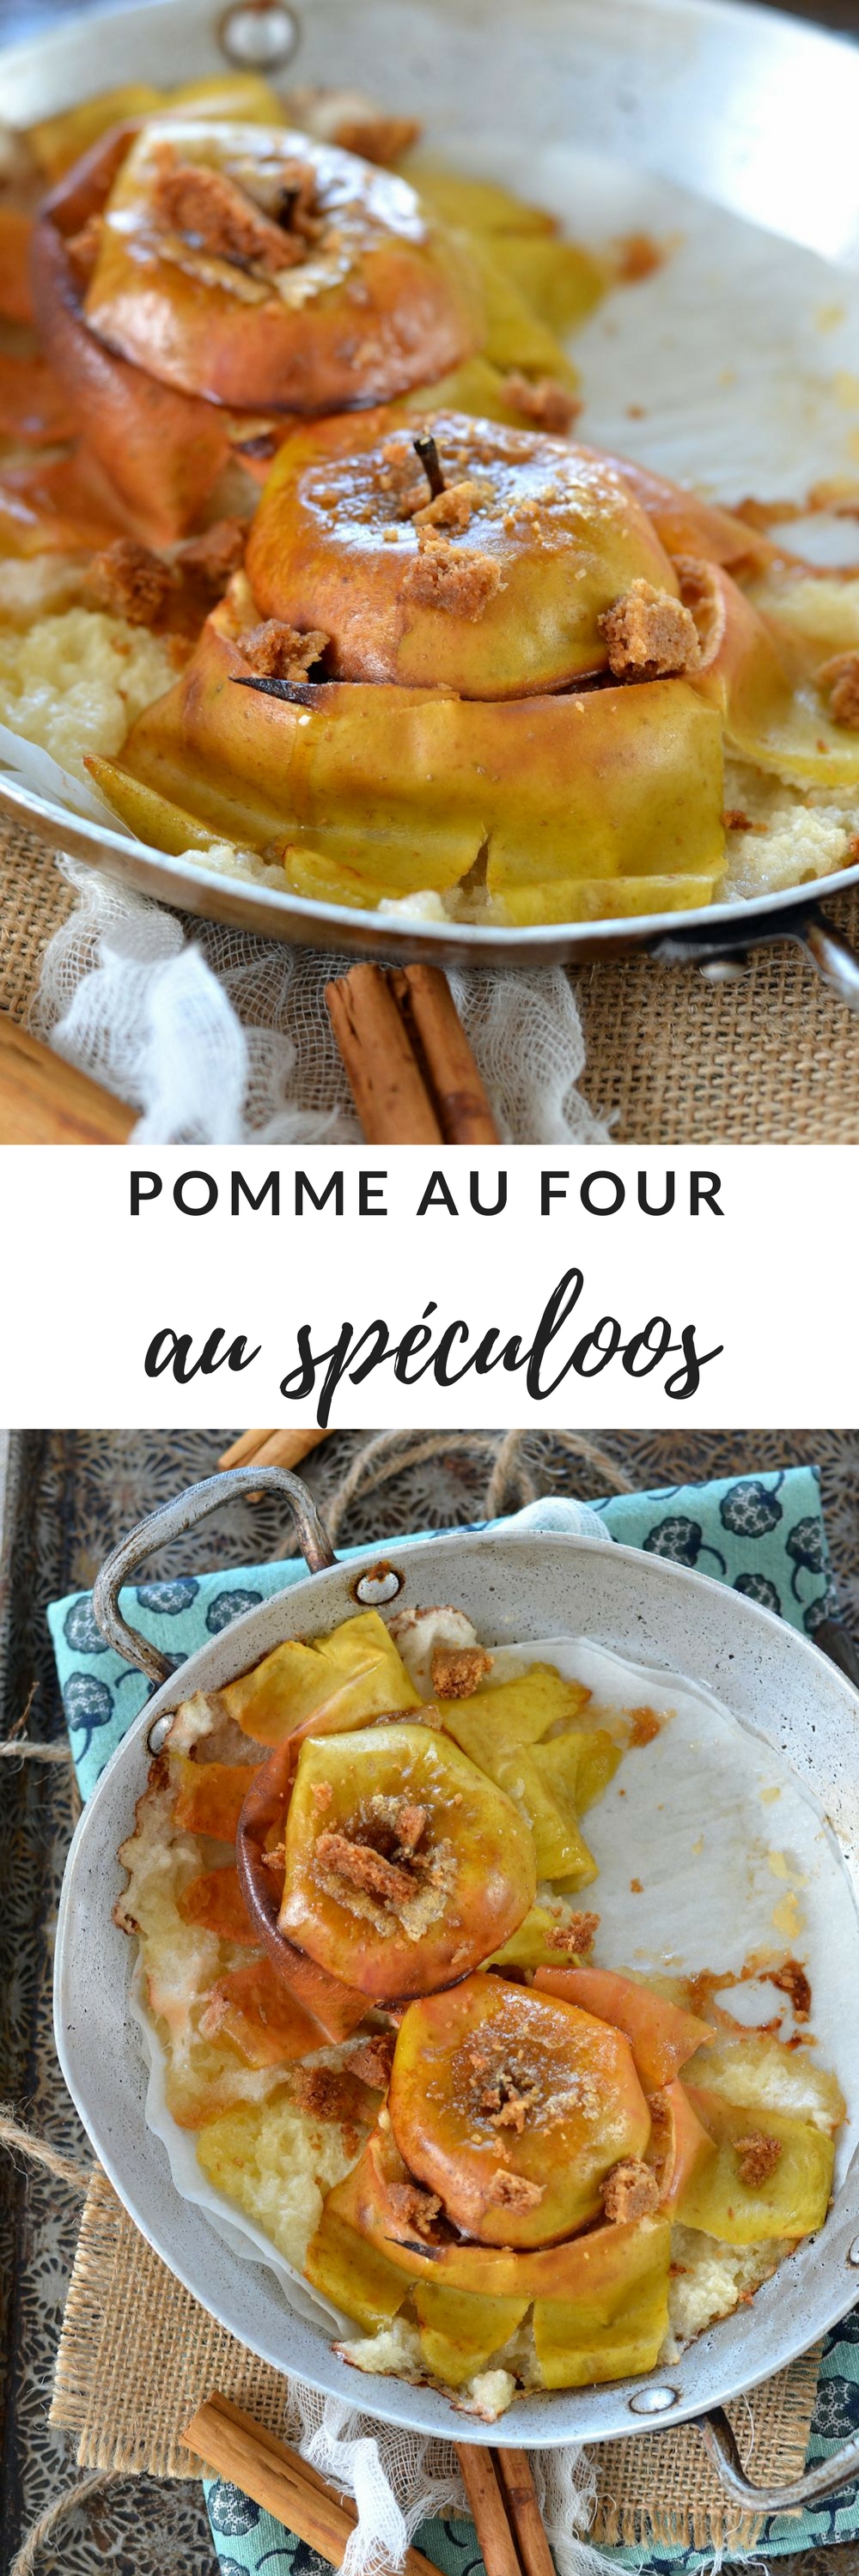 pomme au four speculoos